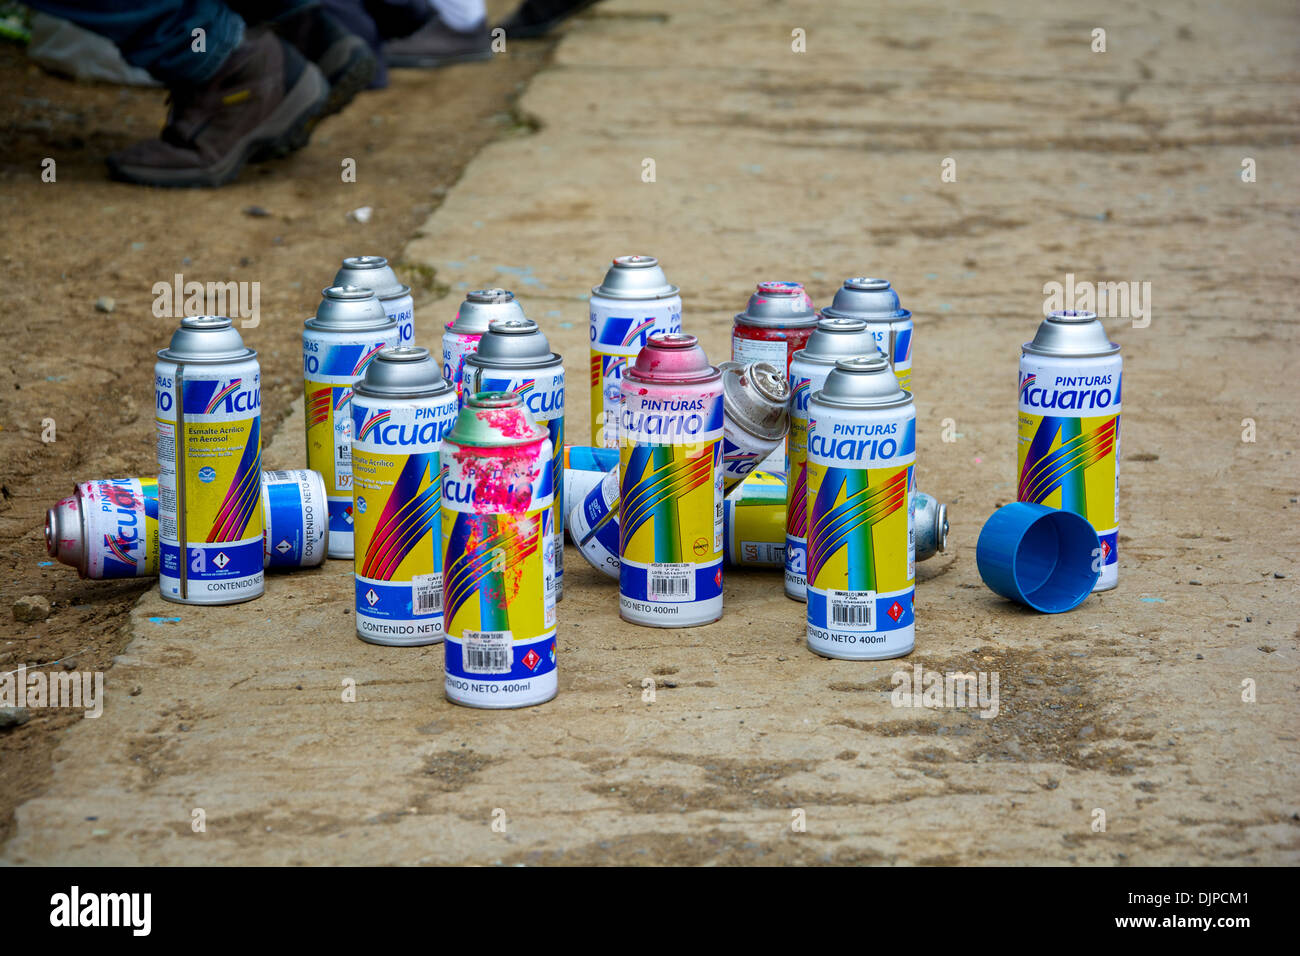 Whole set of the 'Acuario' Spray cans at the event of painting the Cartago Stadium walls Stock Photo